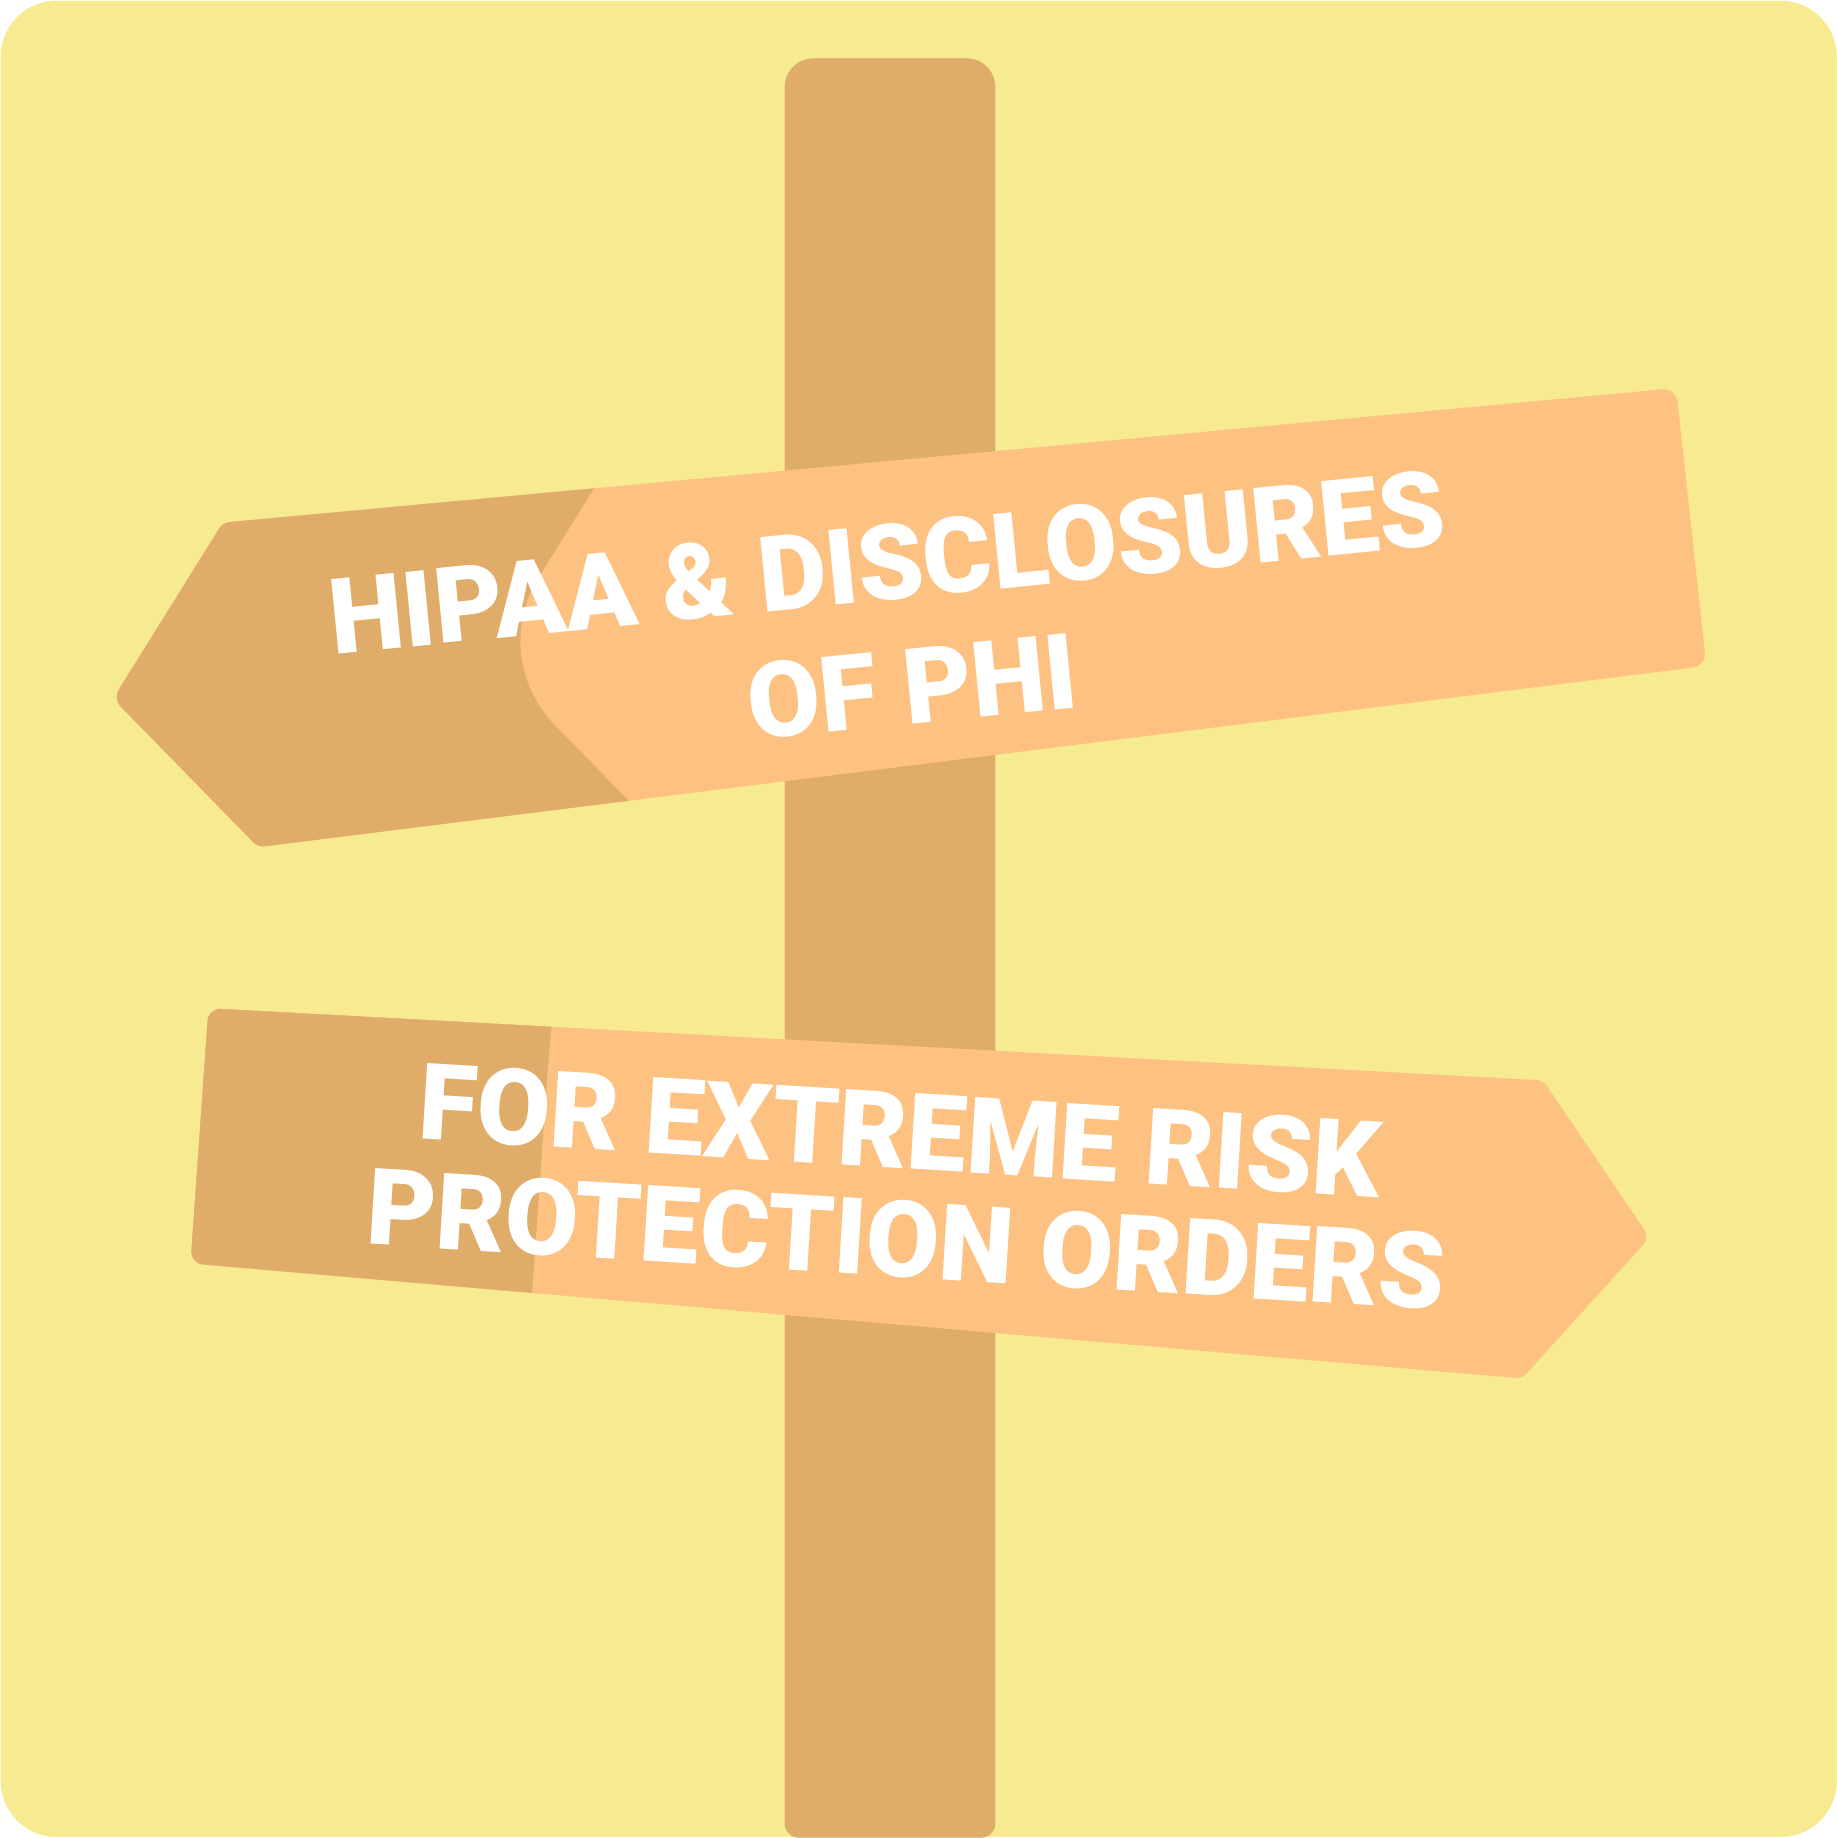 HHS Issues Guidance on HIPAA Disclosures for Extreme Risk Protection Orders